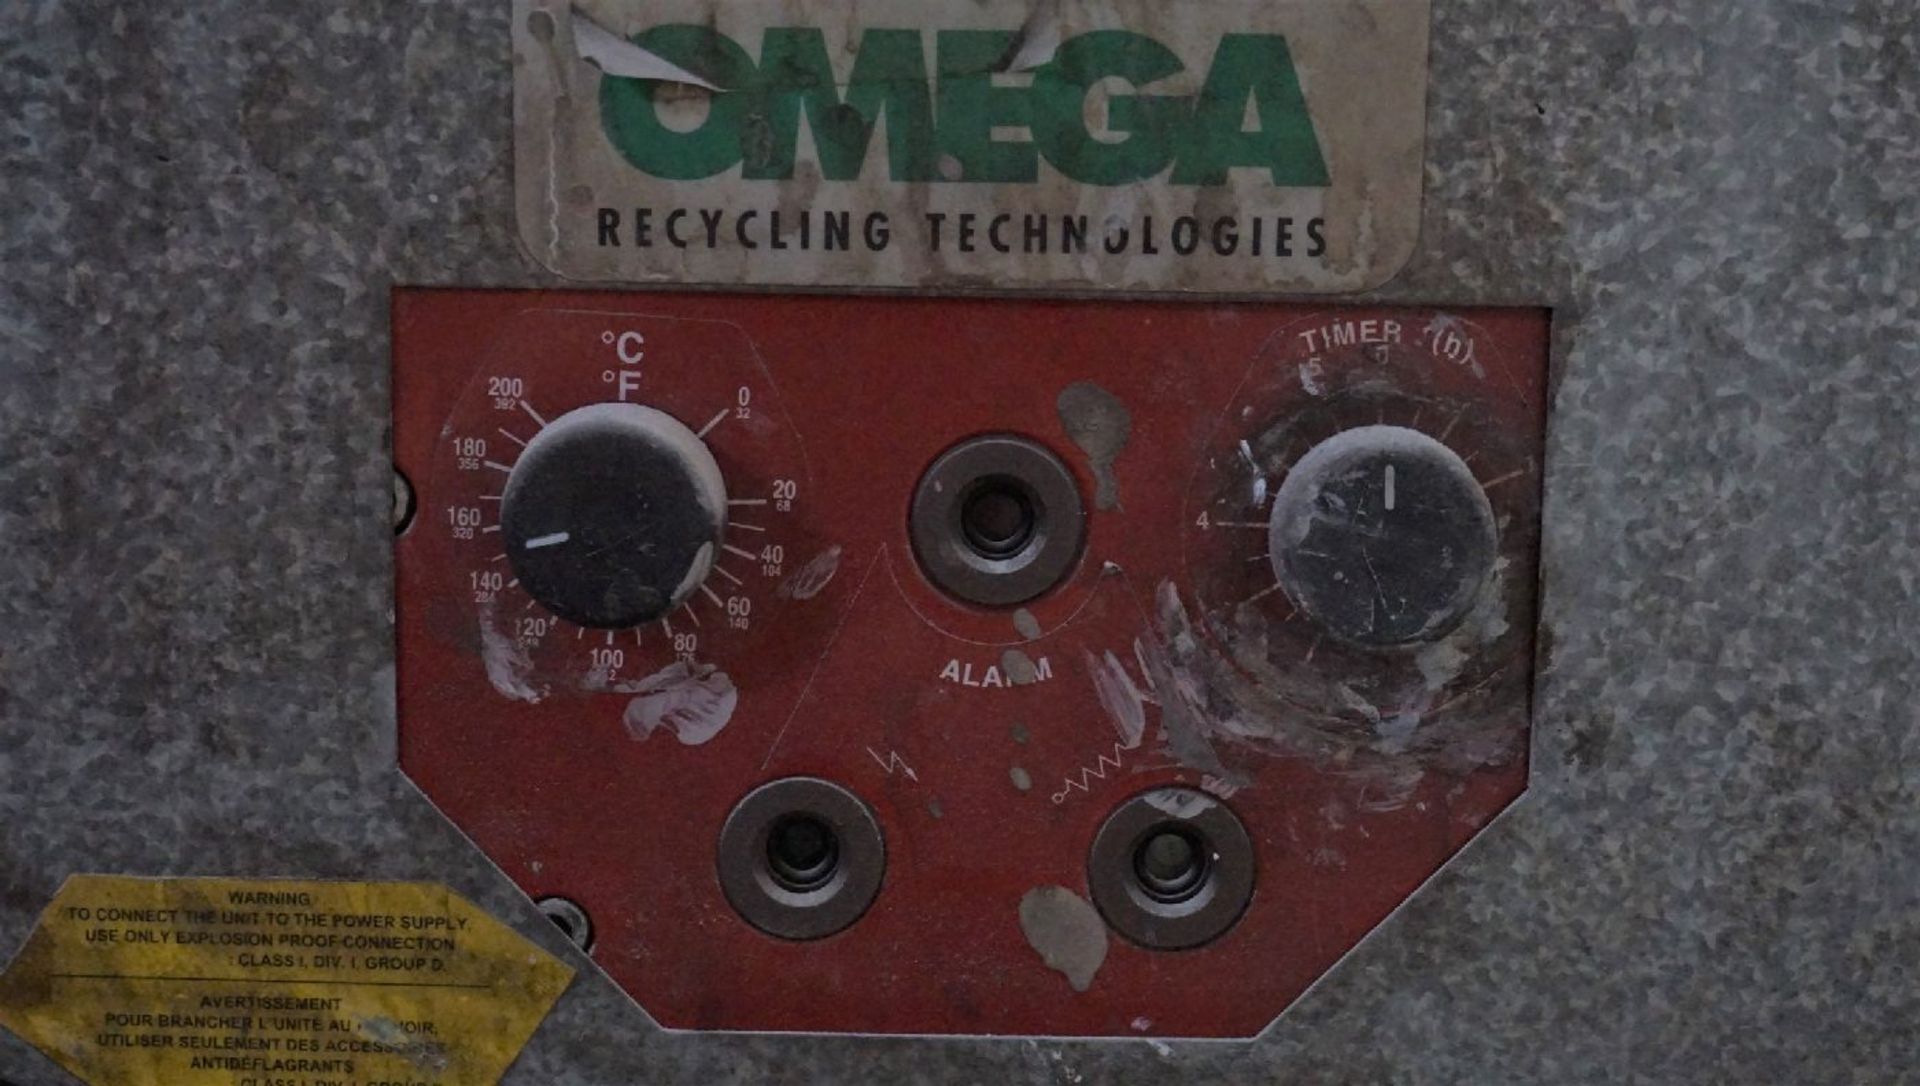 Omega Recycling Technologies Recycling System - Image 2 of 2